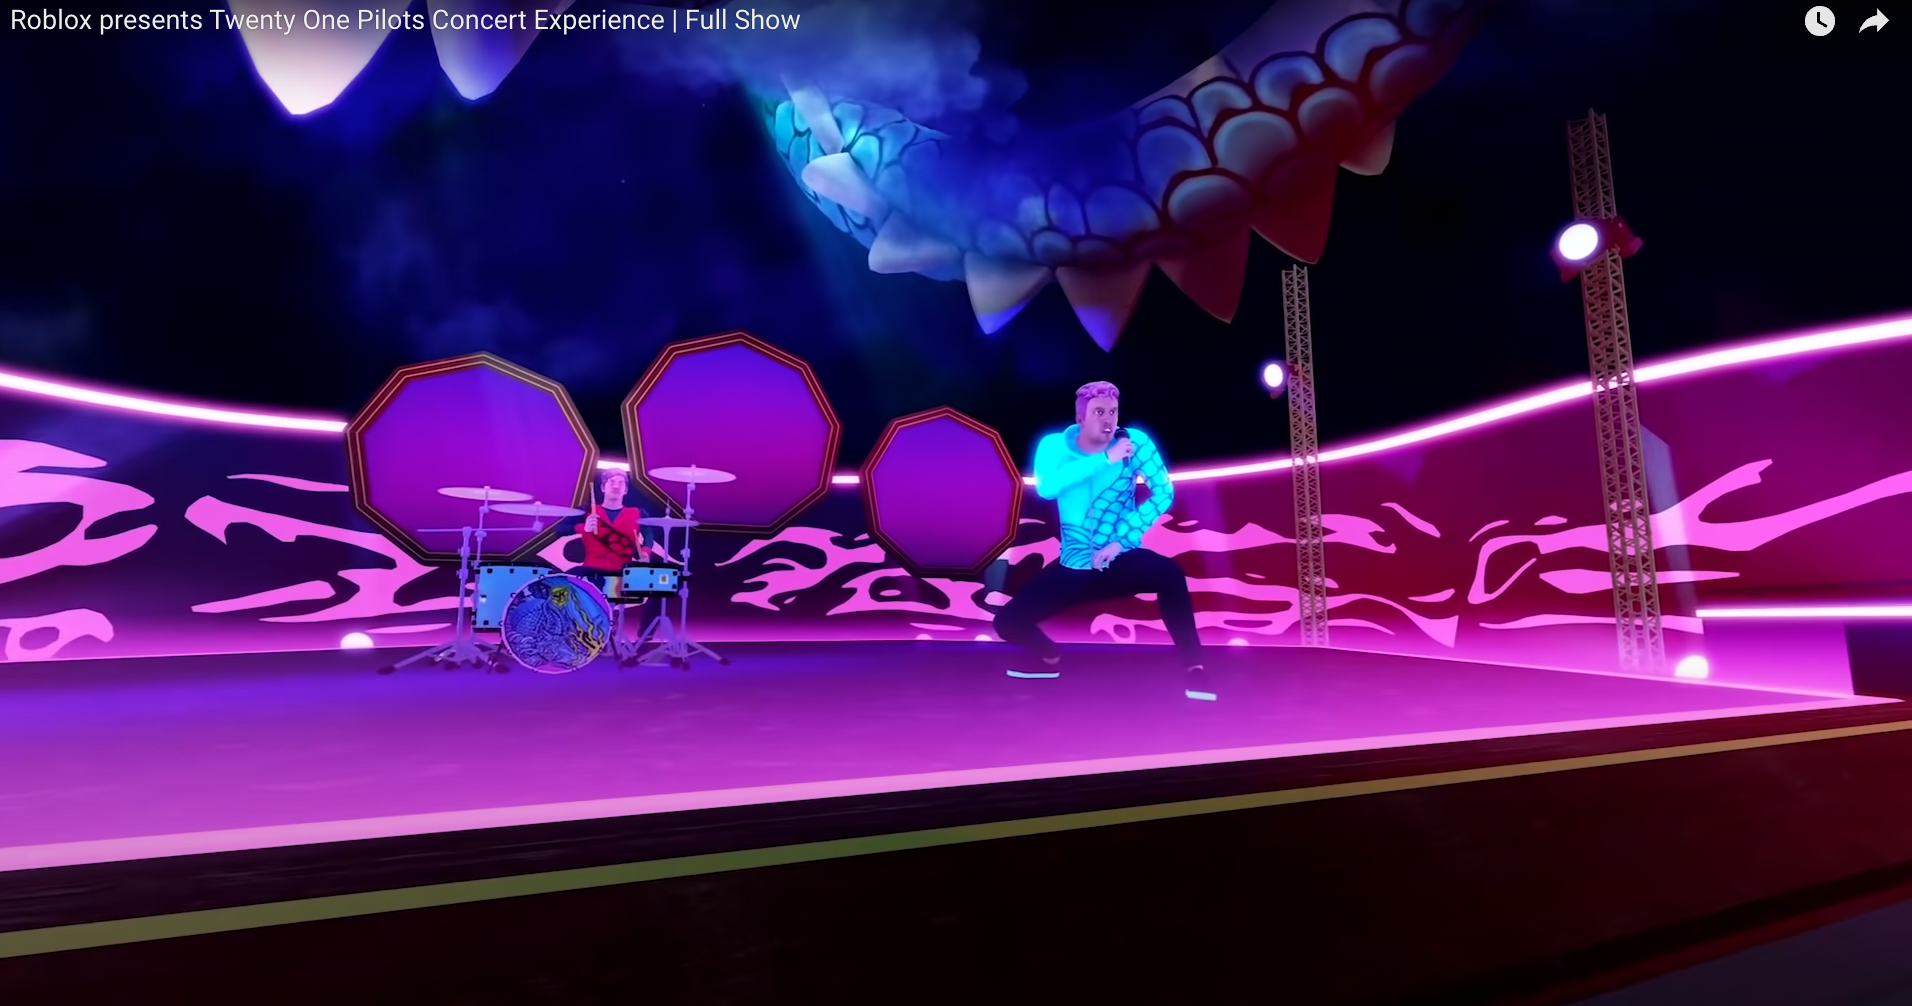 American band Twenty One Pilots staged a full virtual concert on Roblox. 